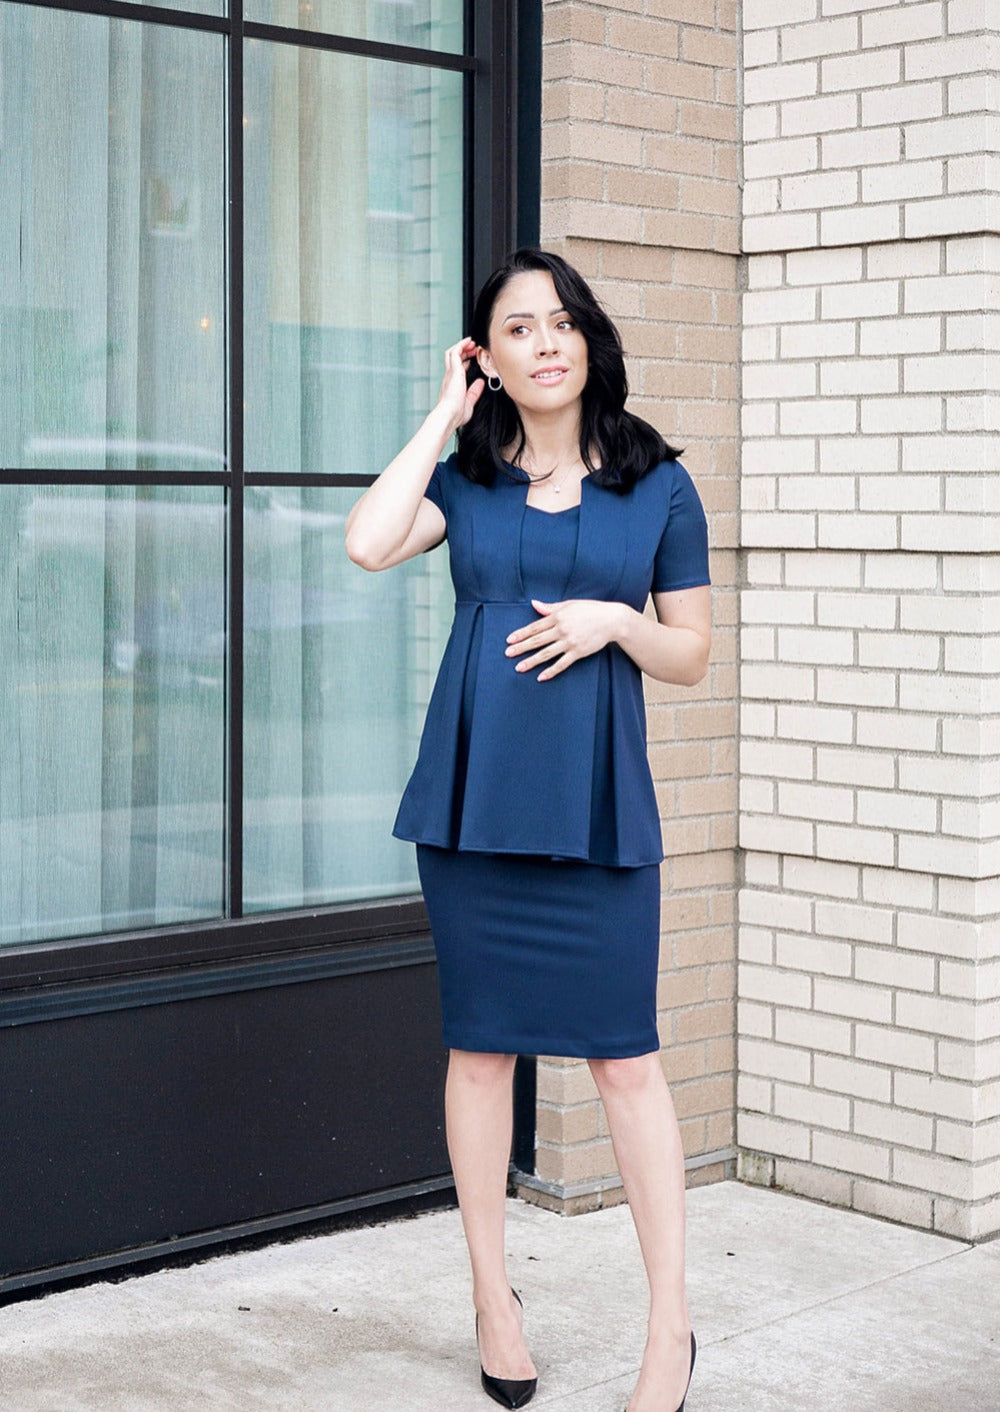 Maternity pencil skirt. Corporate maternity work clothes for professional women. Black or navy blue. Sustainable, washable, travel friendly.